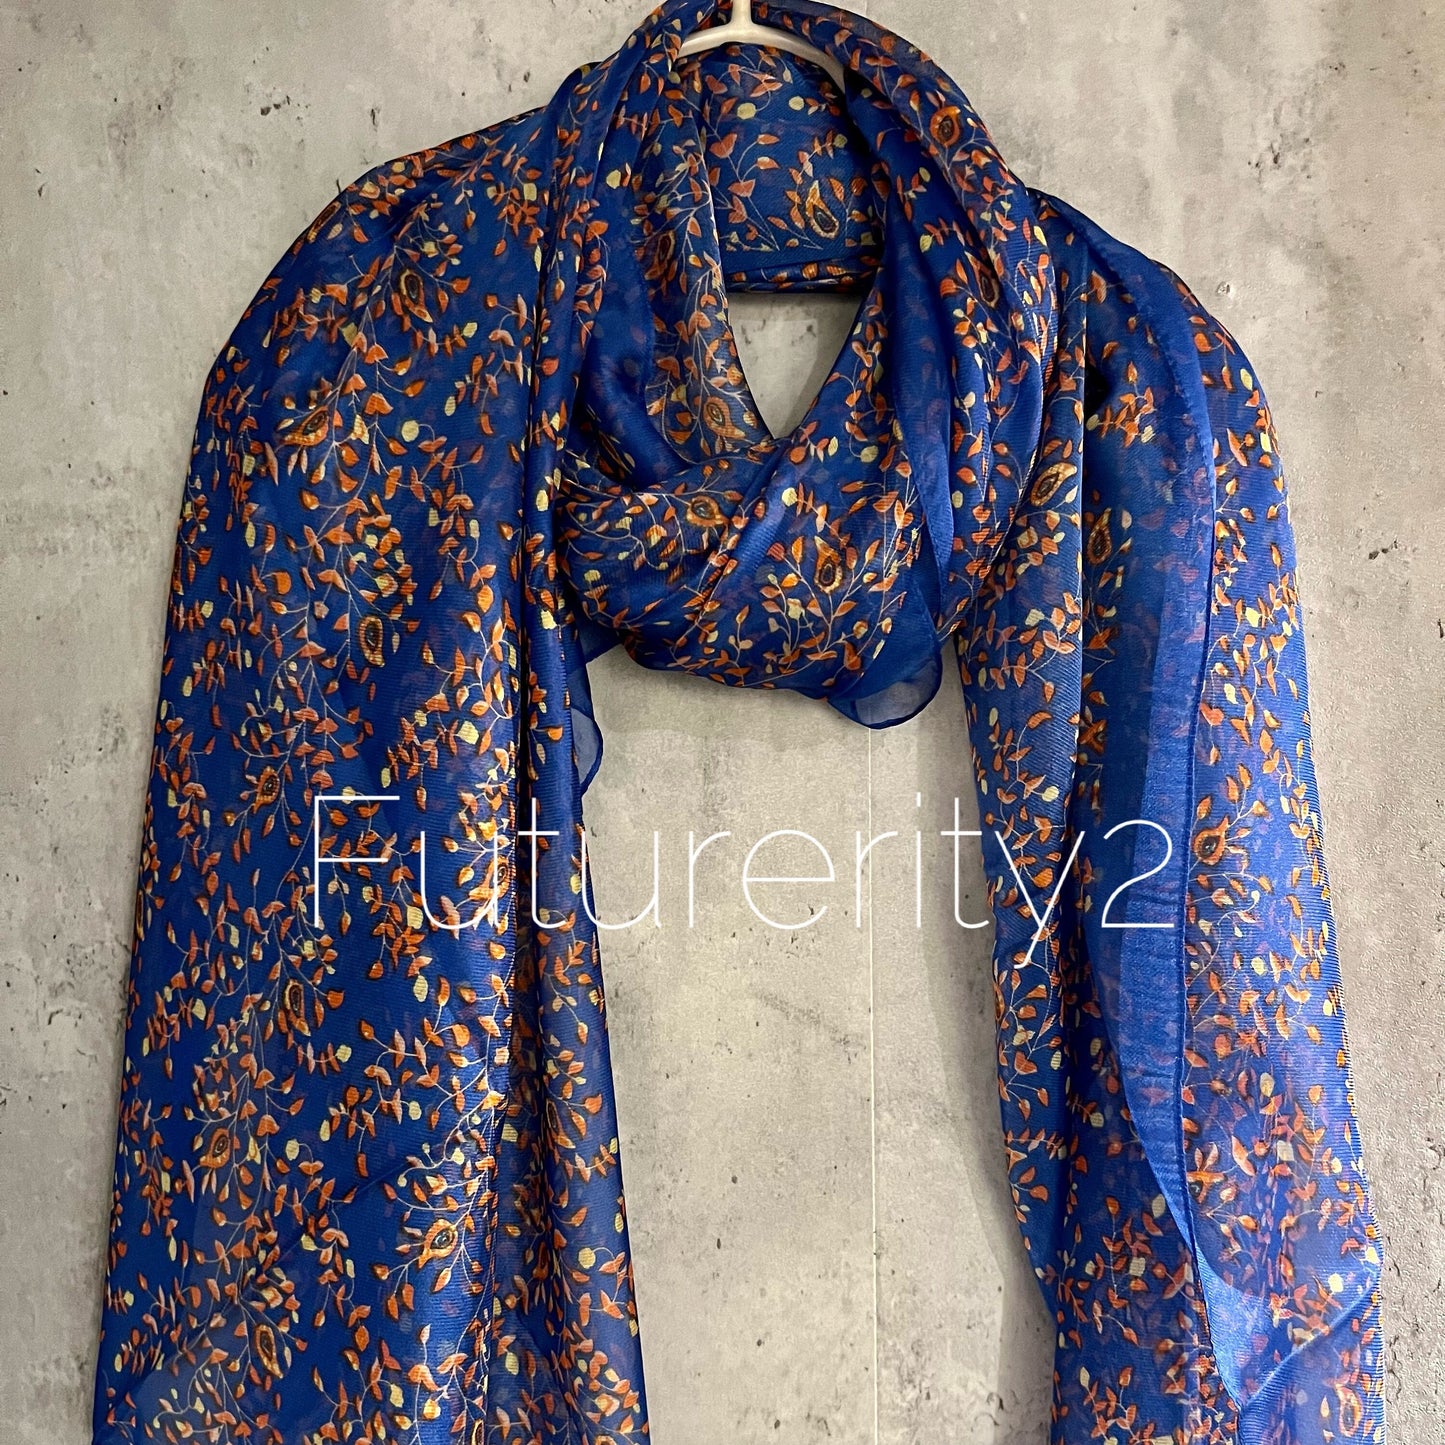 Small Leaves Pattern Blue Silk Scarf/Spring Summer Autumn Scarf/Gifts For Her Birthday/Gifts For Mum/Christmas/Scarf Women/UK Seller